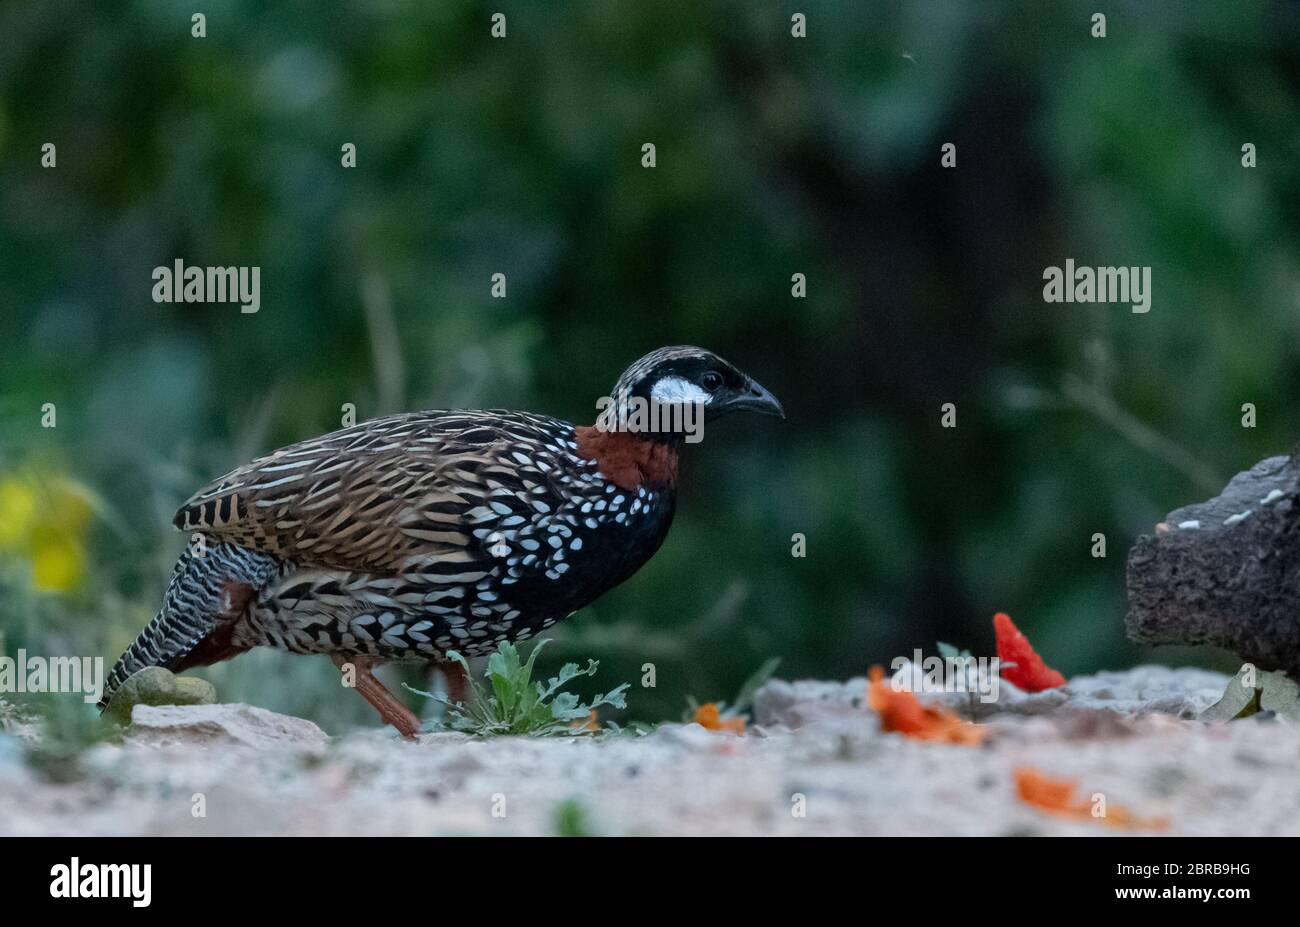 Black Francolin male bird photographed in Sattal Stock Photo